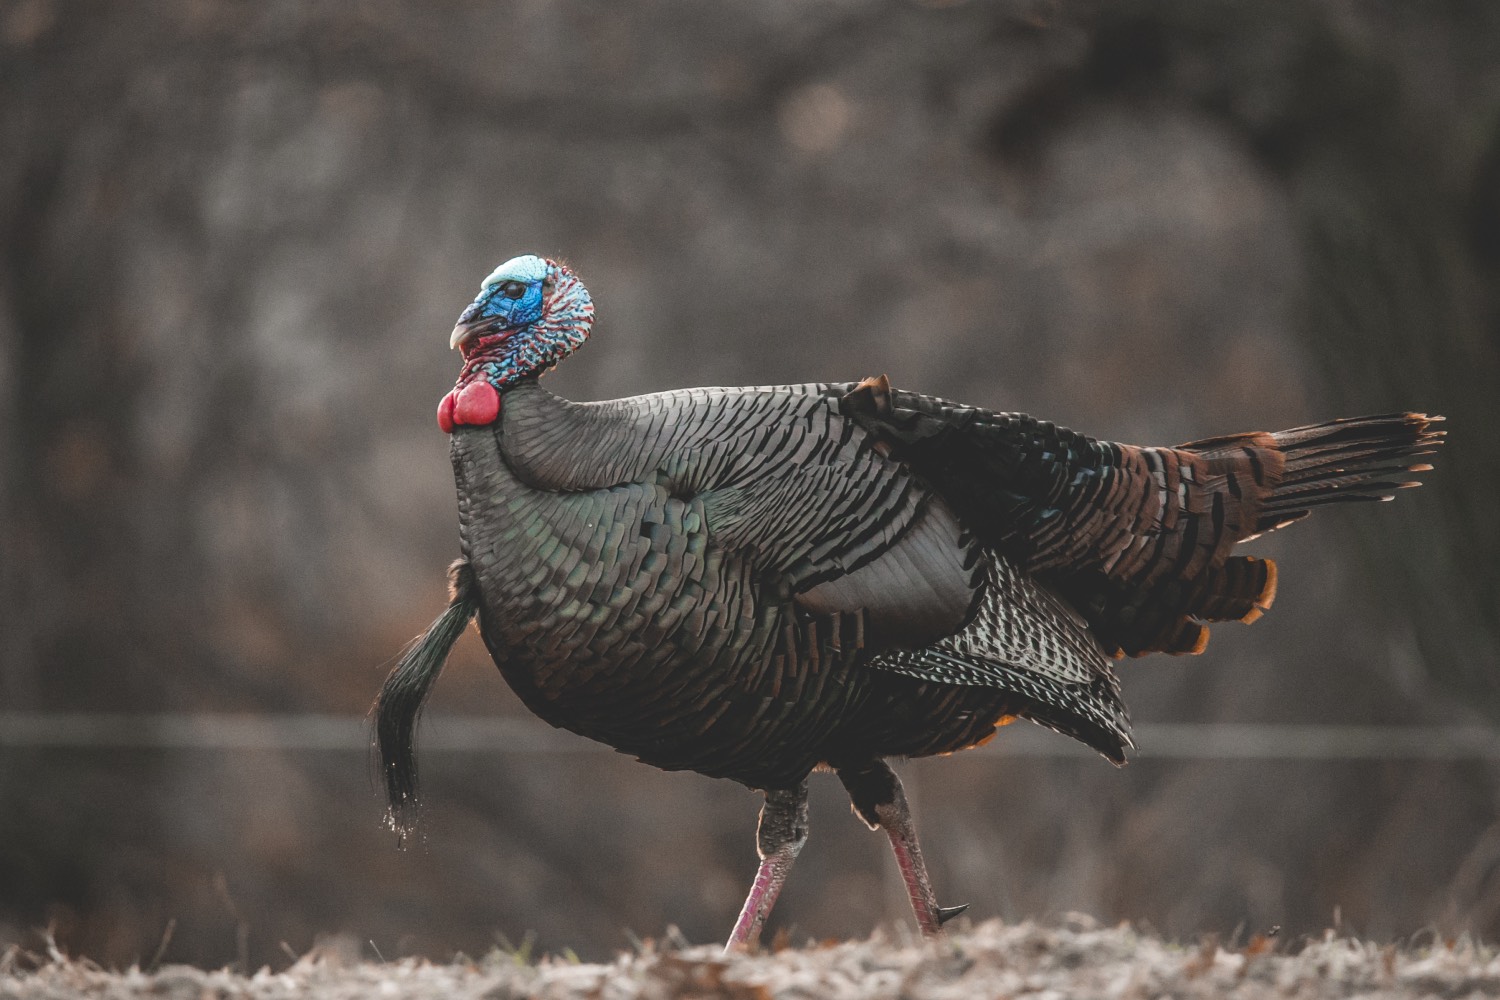 beautiful image of a gobbler